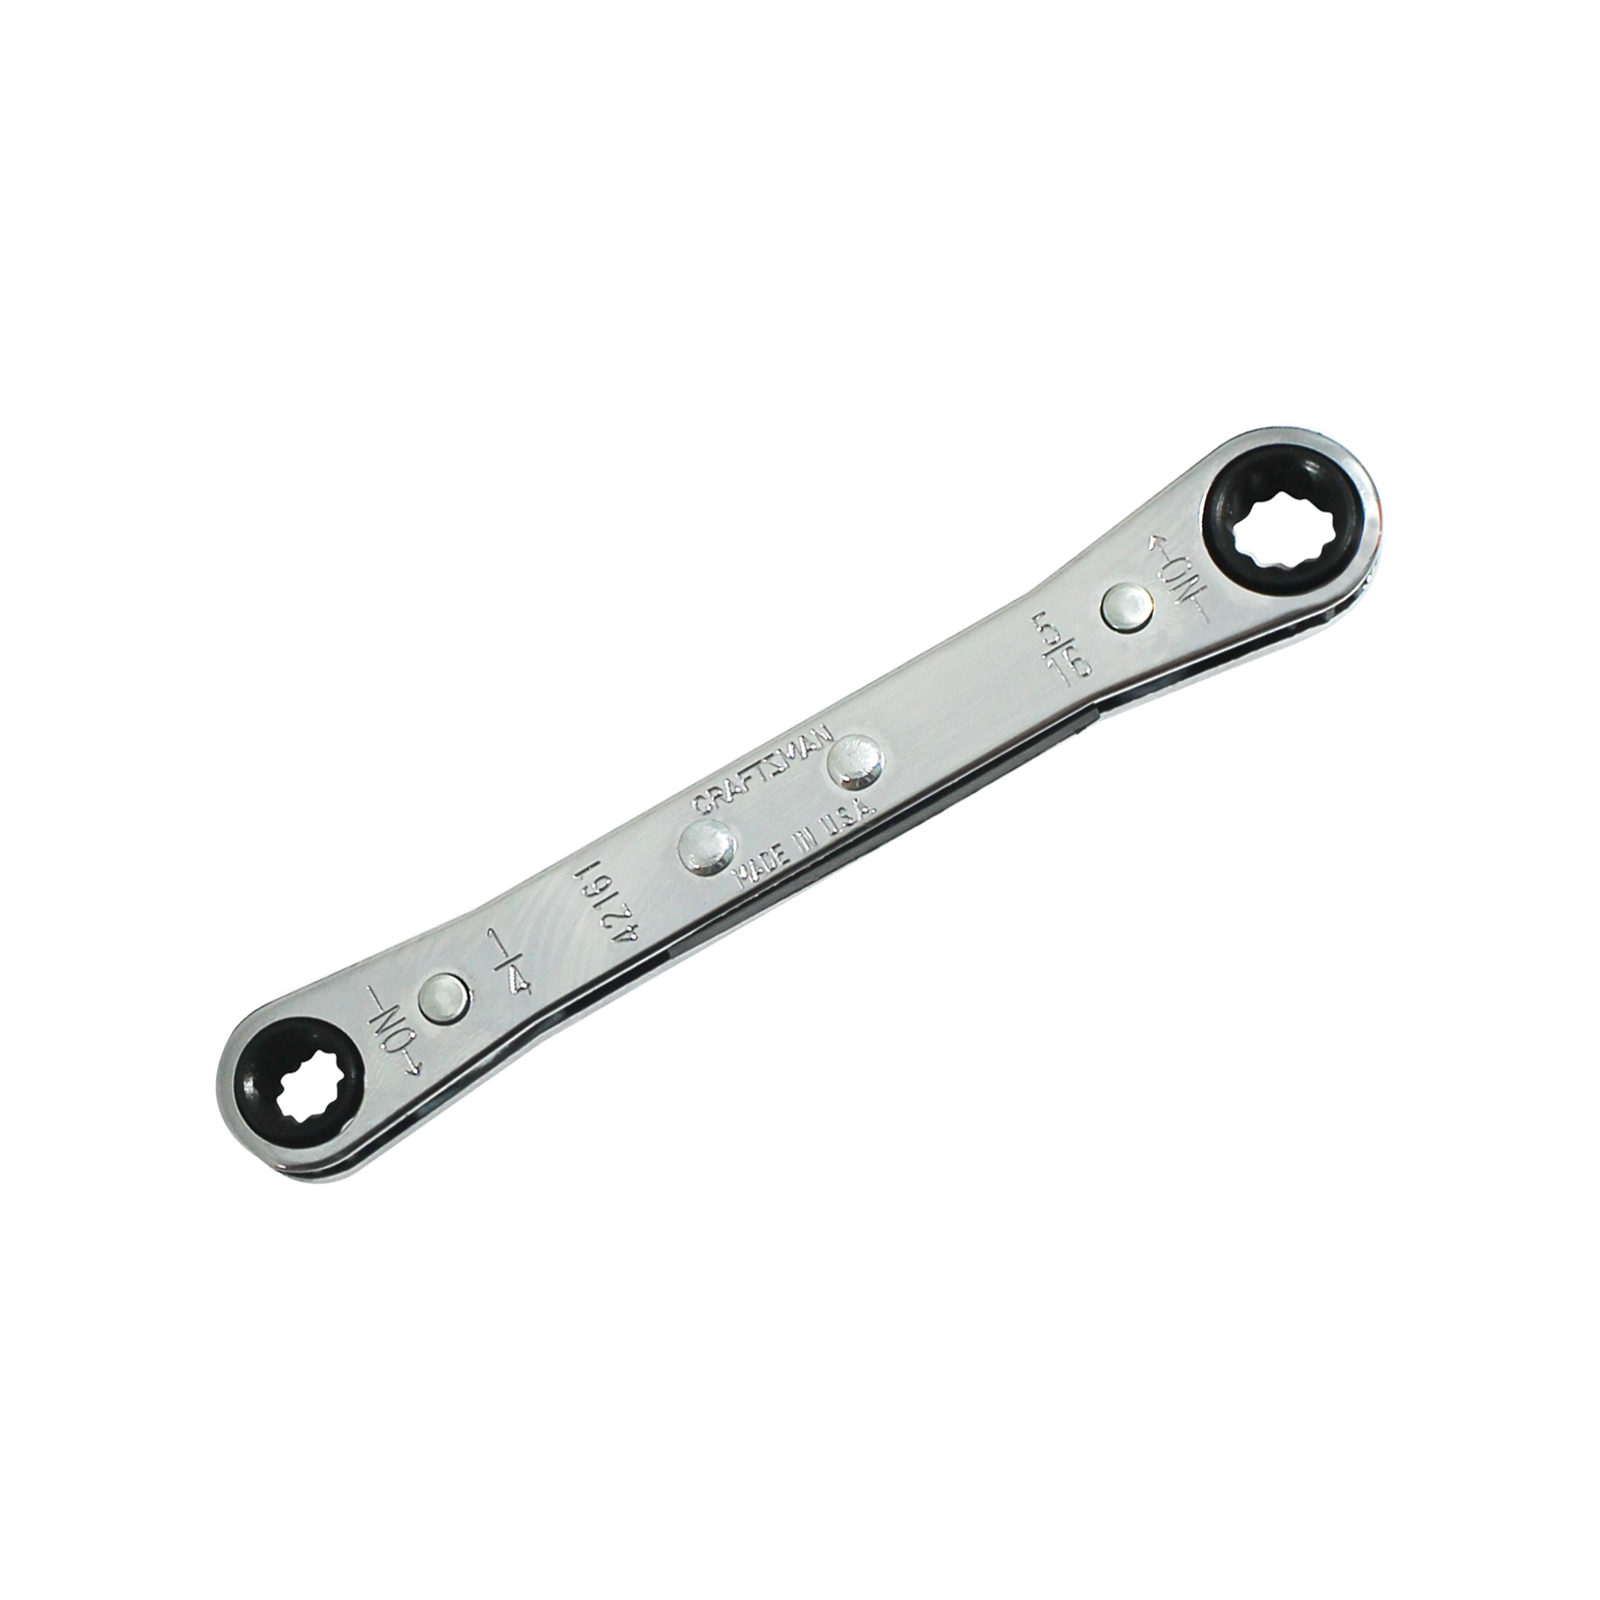 Craftsman 1/4 x 5/16 in. Wrench, Ratcheting Box | Shop Your Way: Online